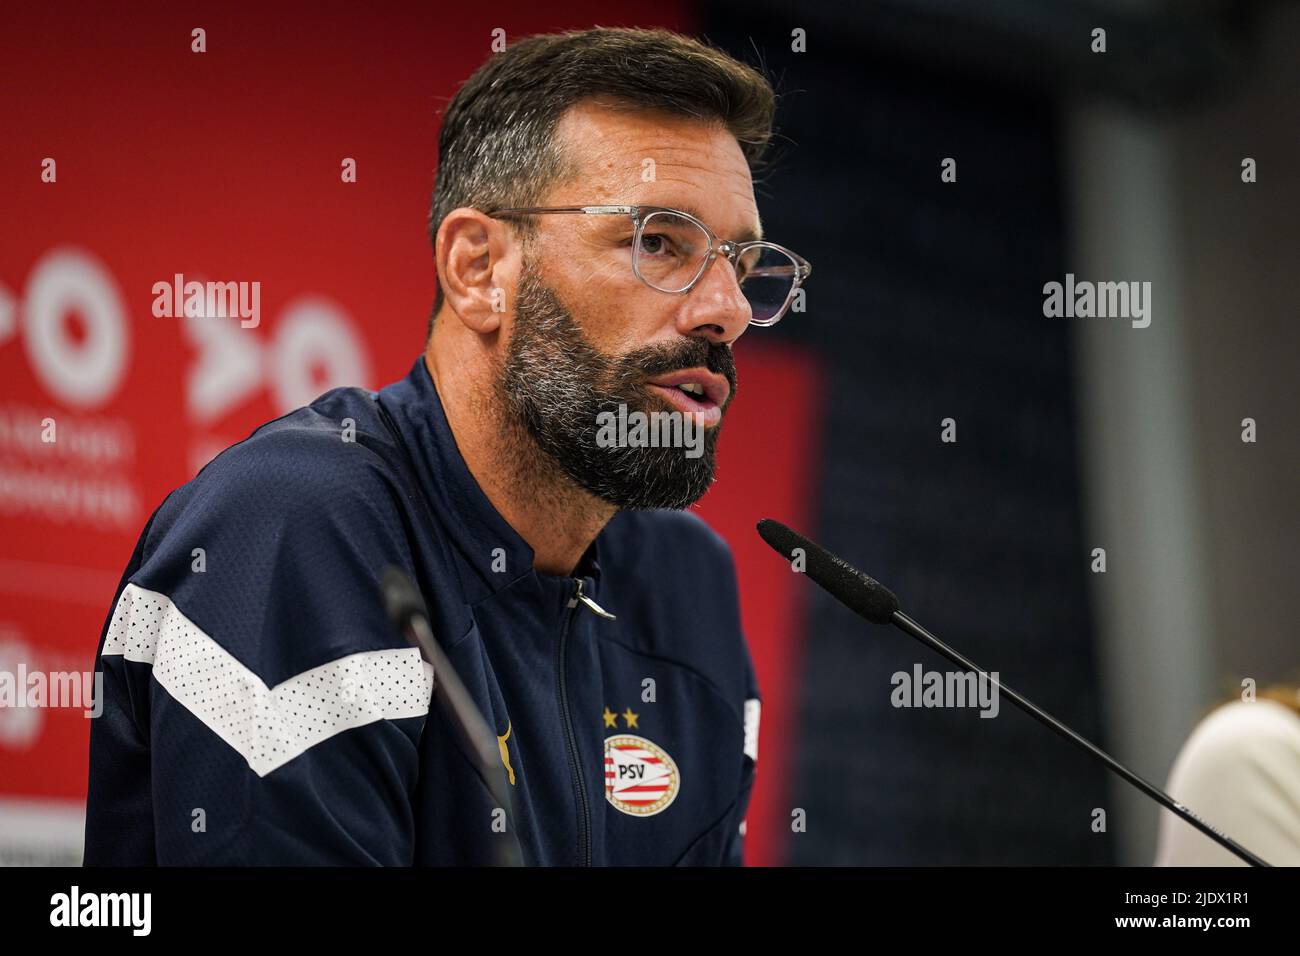 EINDHOVEN, NETHERLANDS - JUNE 20: Coach Ruud van Nistelrooij of PSV during  a press conference following the First Training Season 2022/2023 of PSV  Eindhoven at PSV Campus De Herdgang on June 20,